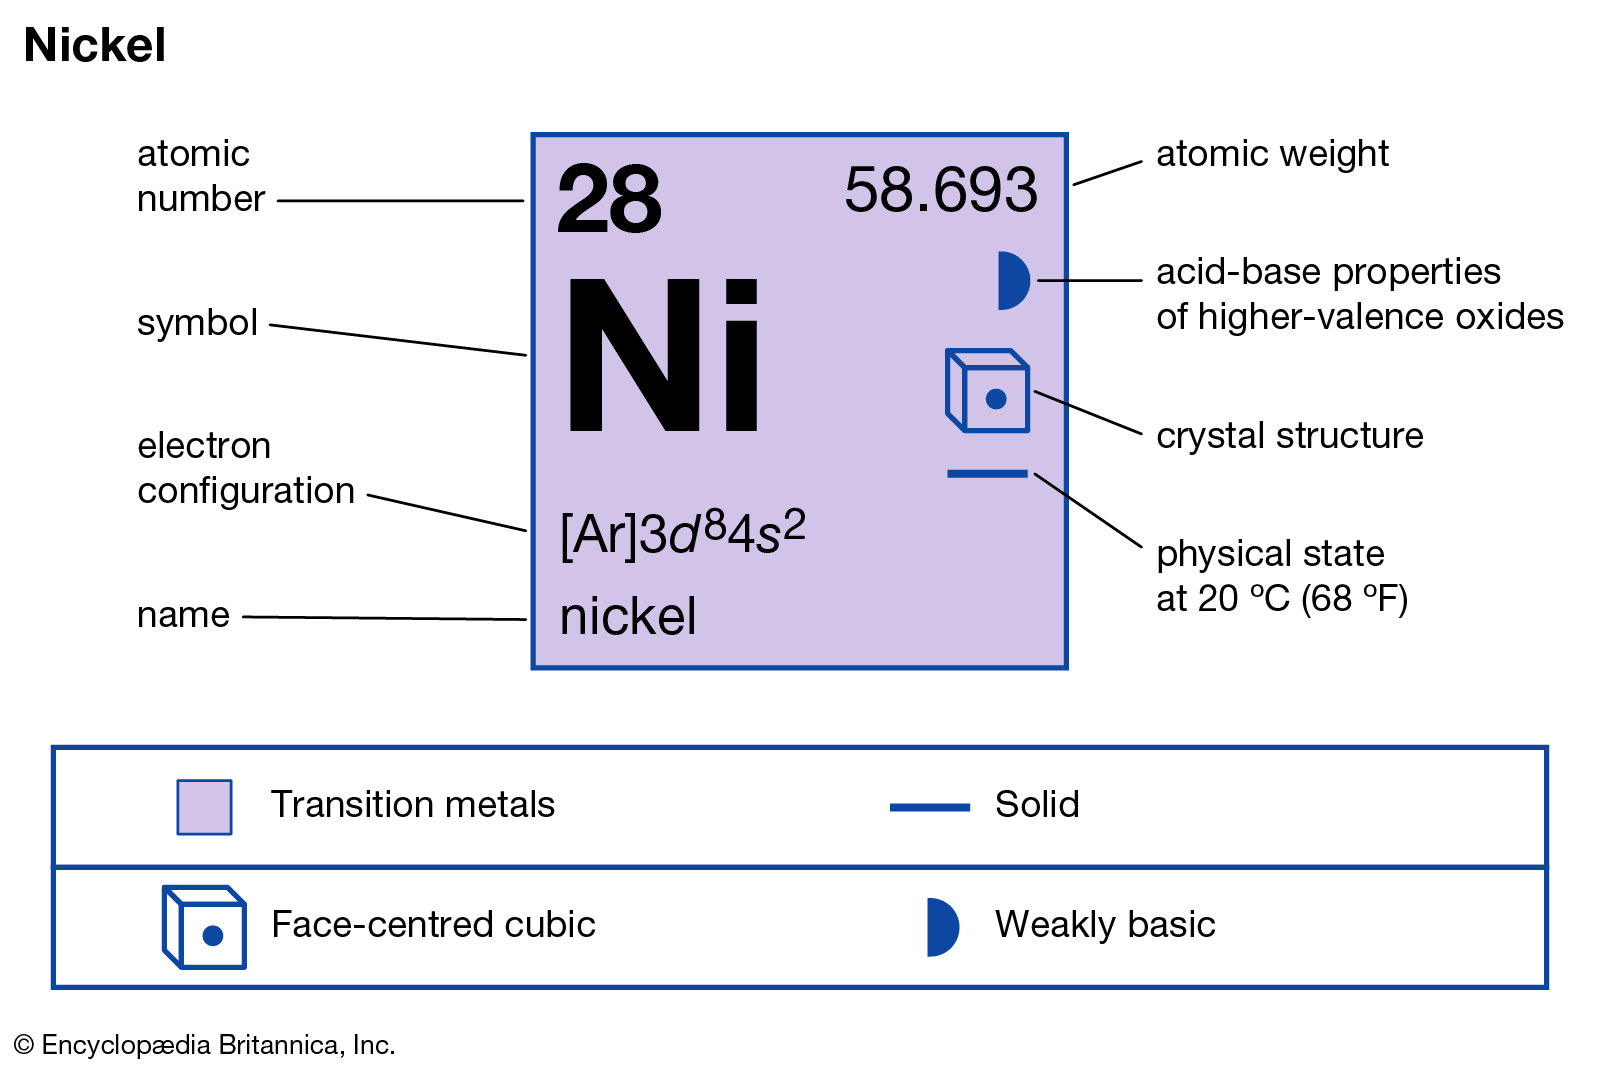 hinh-anh-interesting-facts-about-nickel-57-0